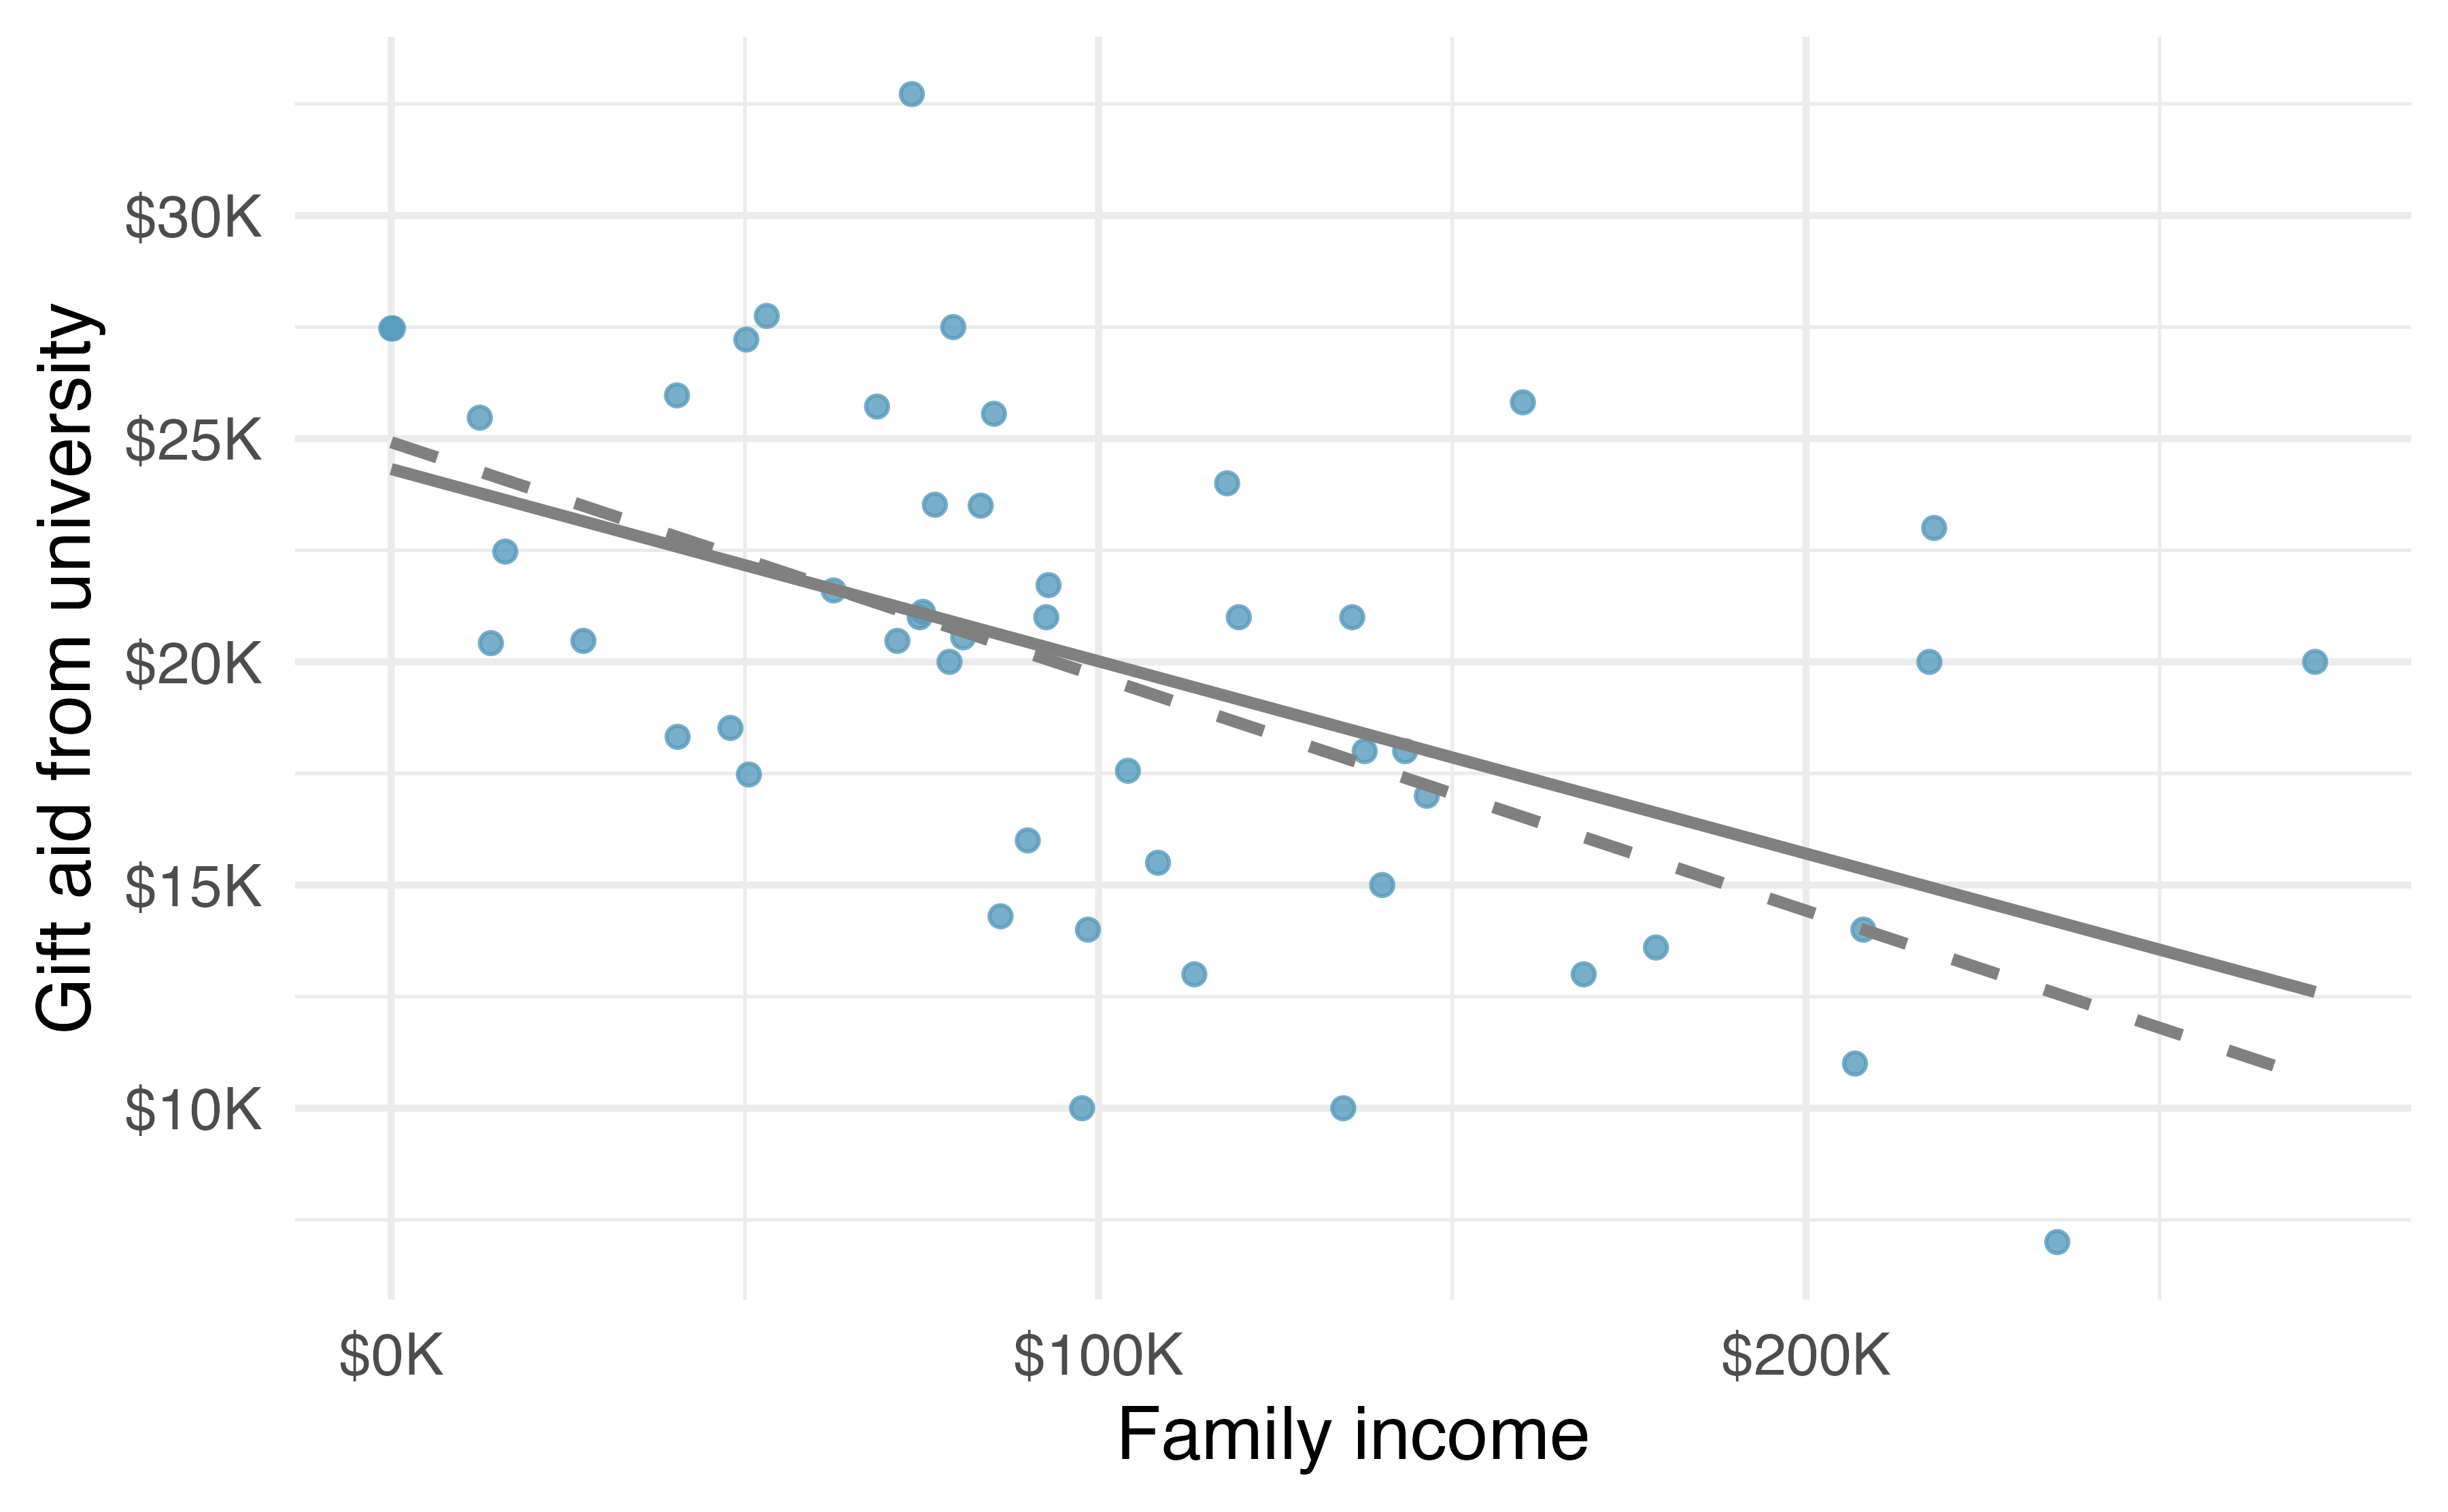 Gift aid and family income for a random sample of 50 freshman students from Elmhurst College. The dashed line represents the line that minimizes the sum of the absolute value of residuals, the solid line represents the line that minimizes the sum of squared residuals, i.e., the least squares line.